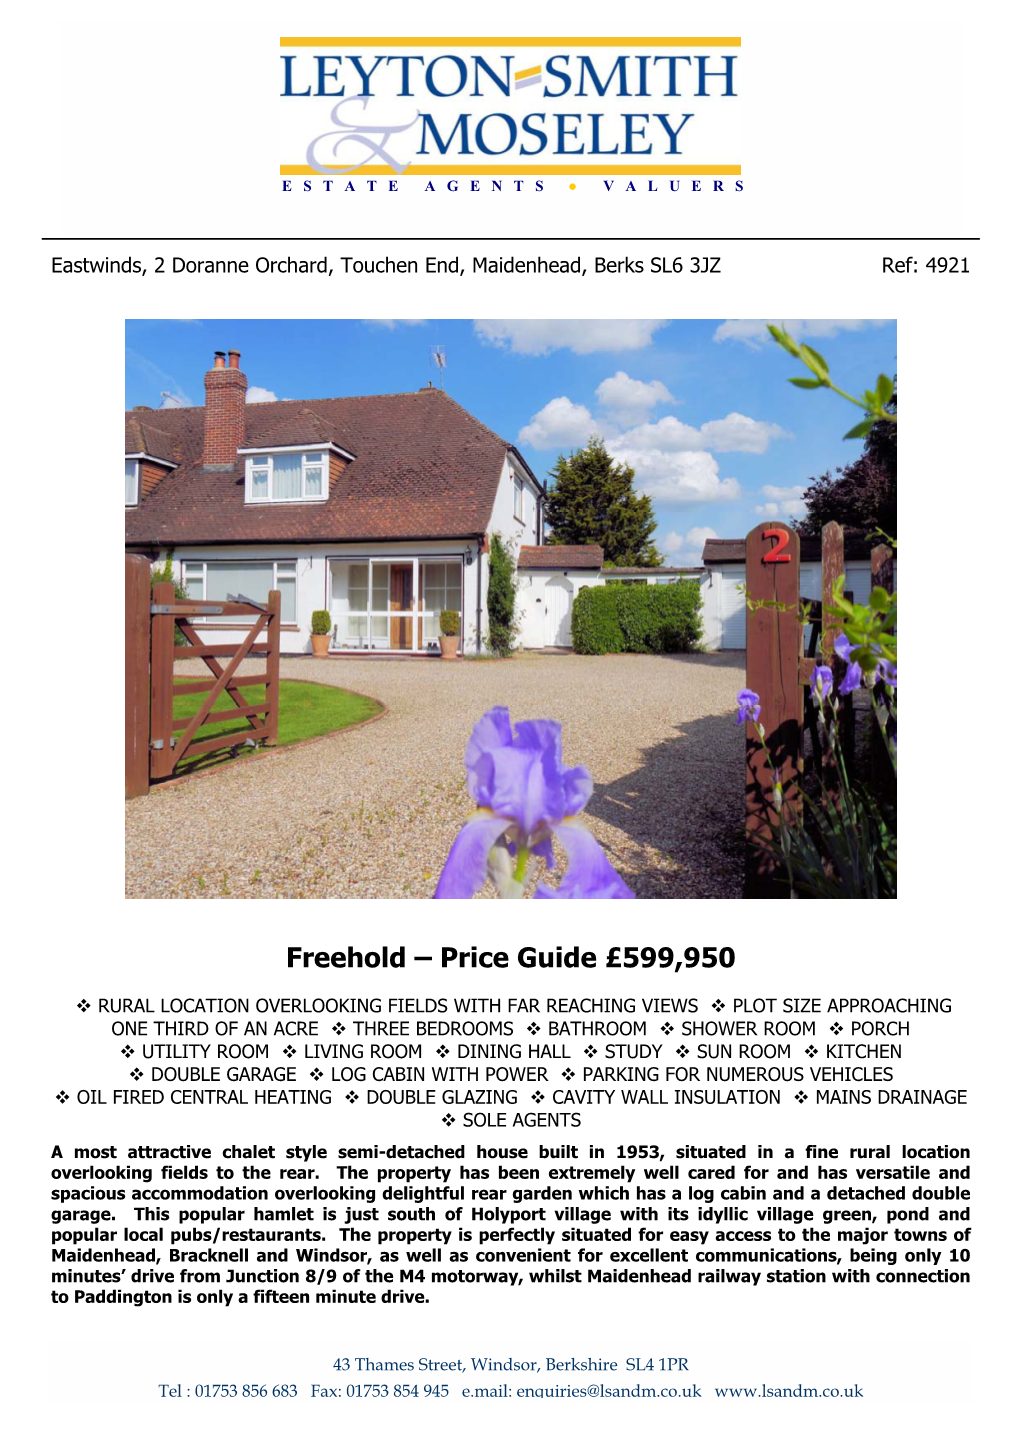 Freehold – Price Guide £599,950